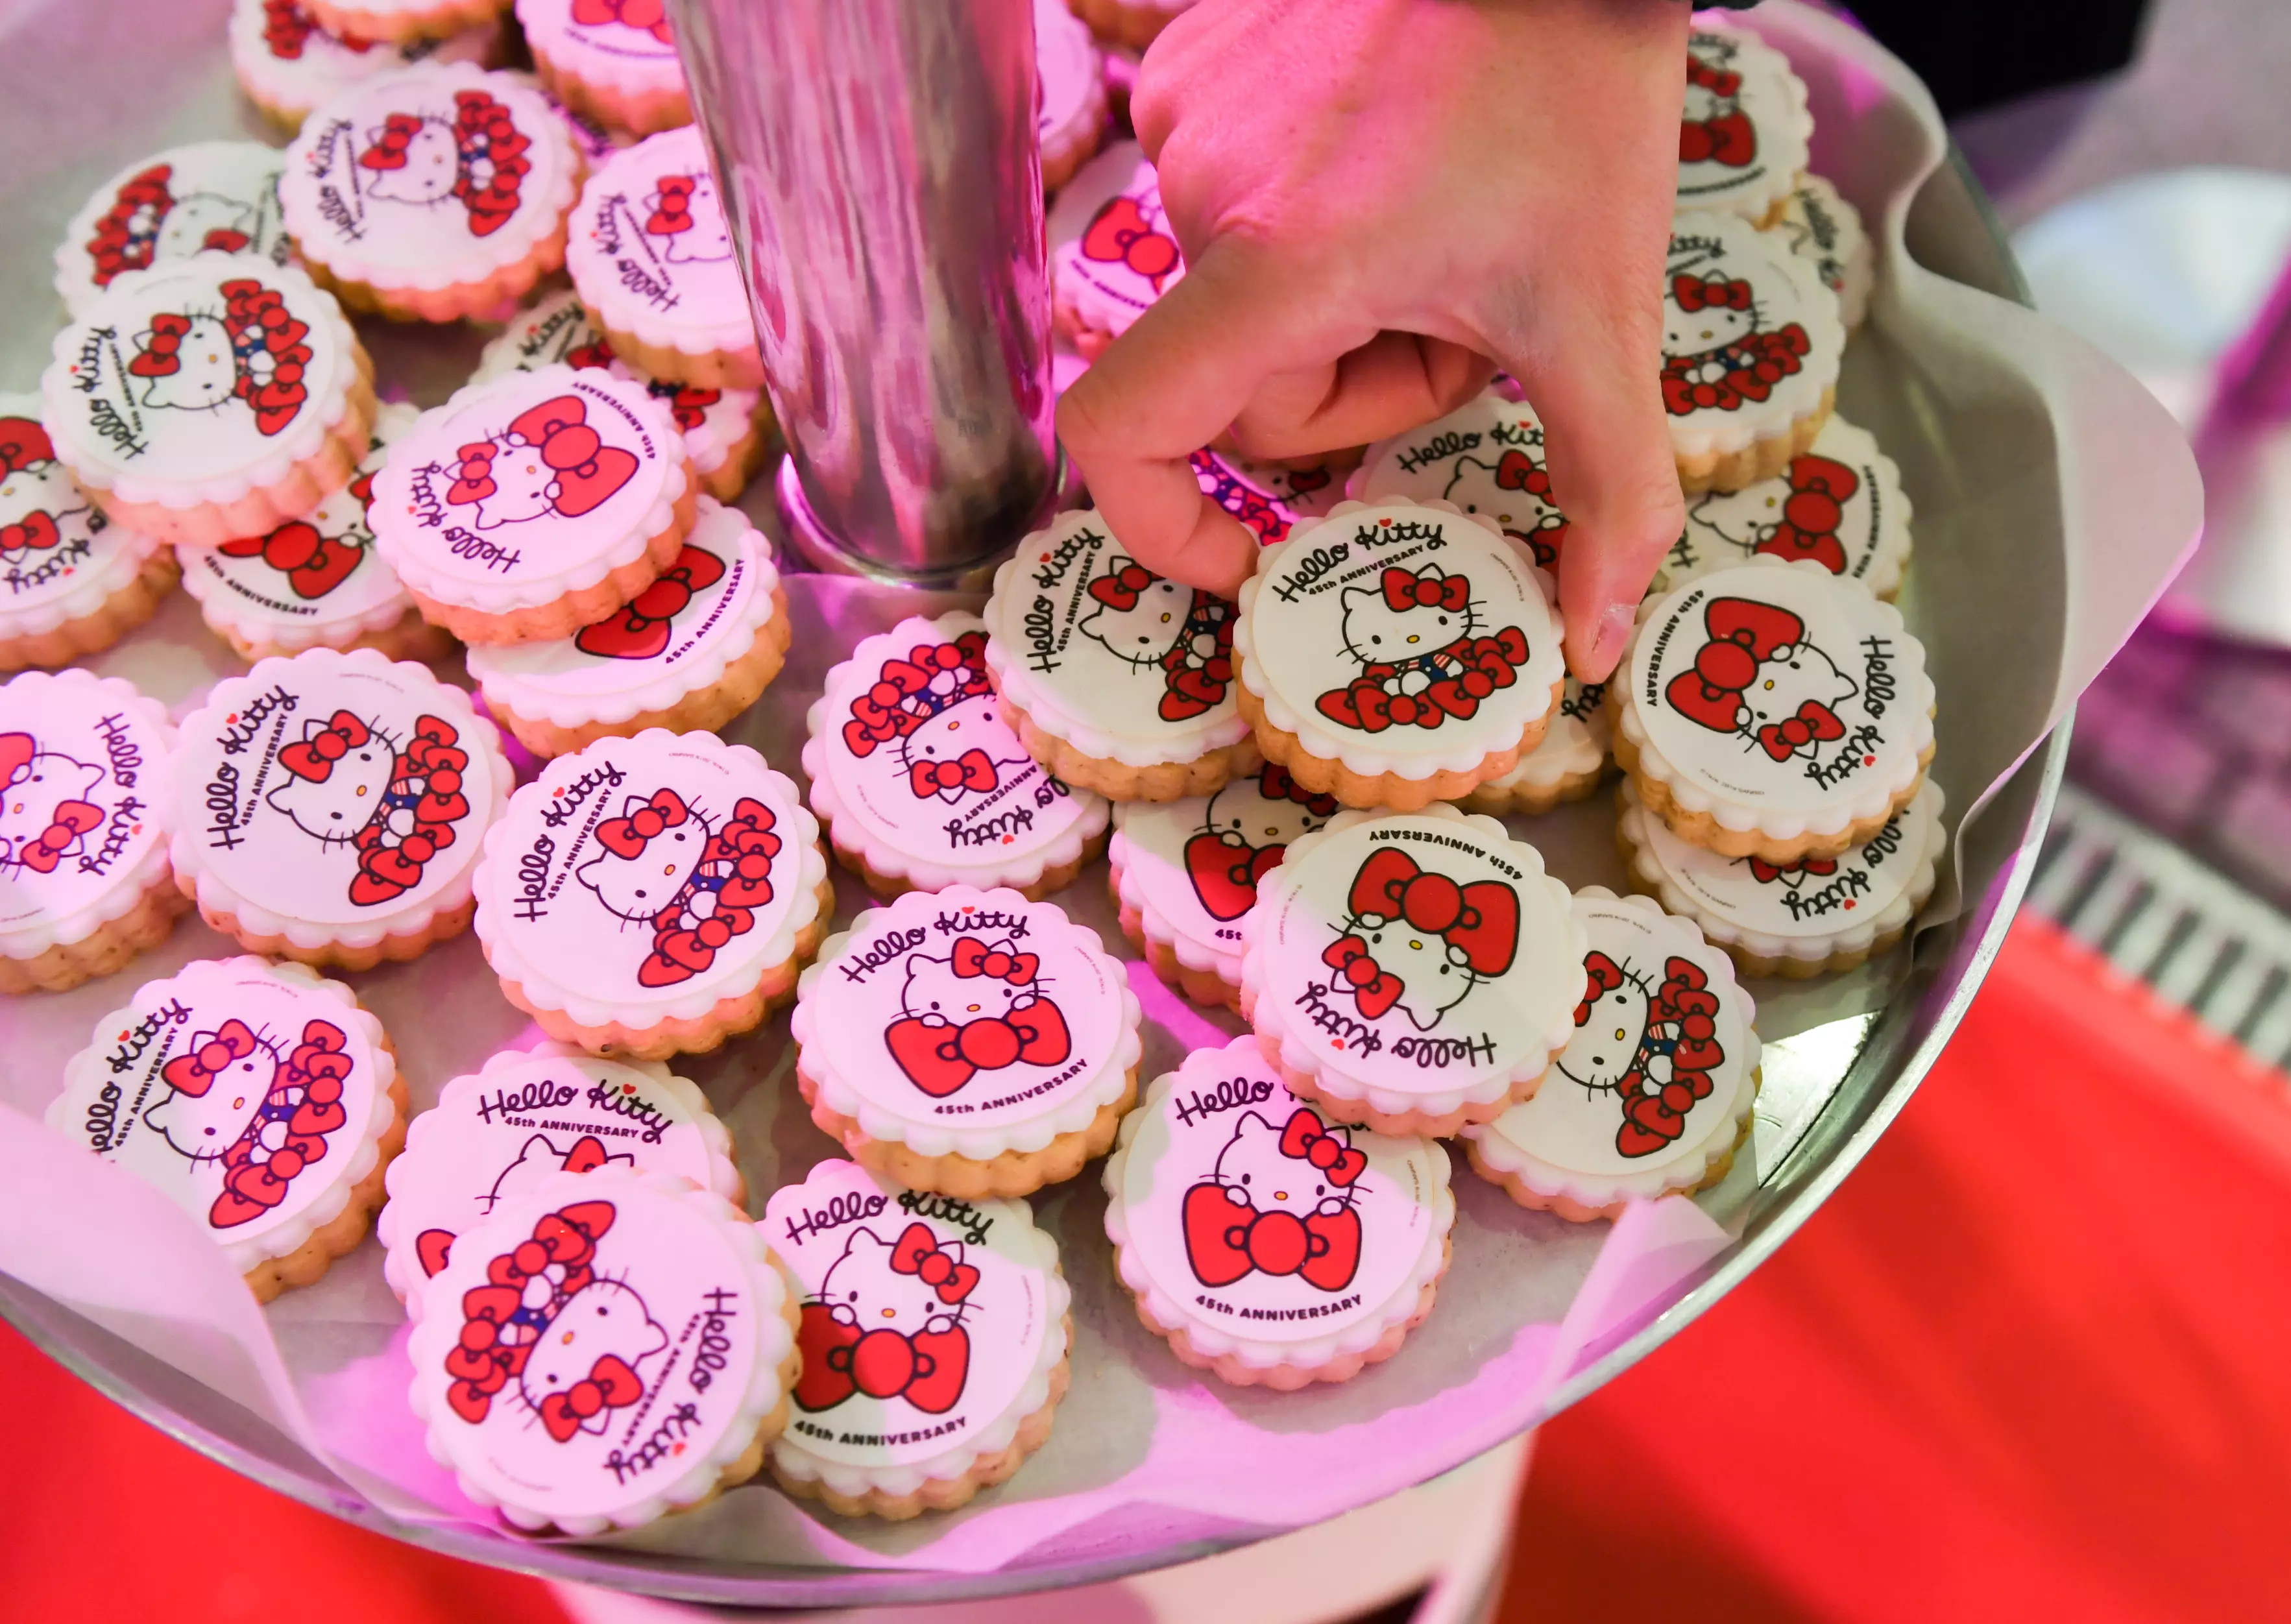 When Hello Kitty turned 40, the entire franchise was worth $8 billion (£6,907,835,513.60) a year (